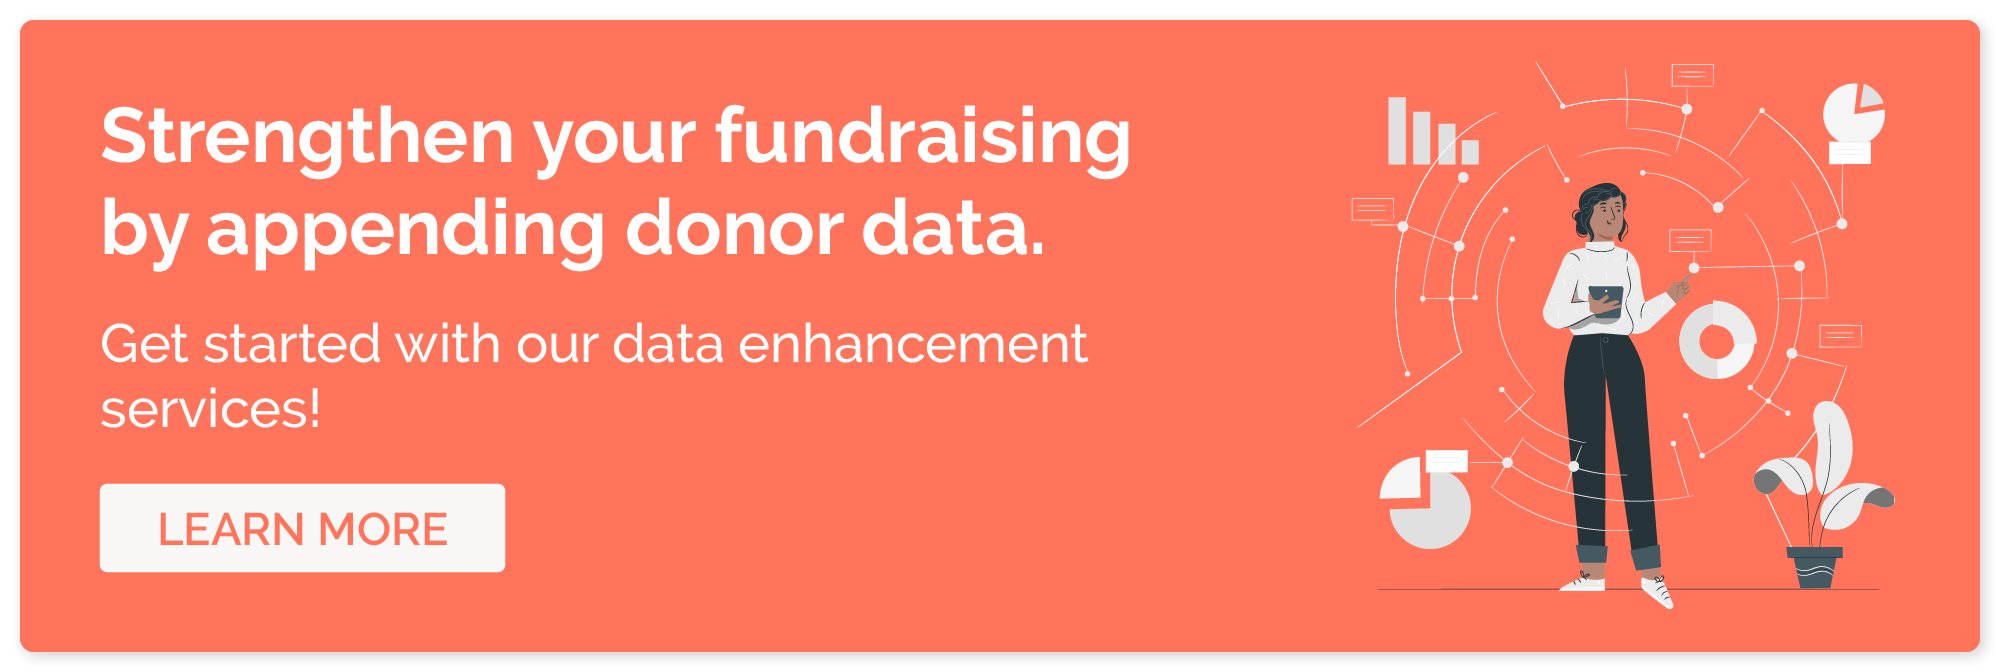 Enhance nonprofit fundraising by appending donor data with Double the Donation.